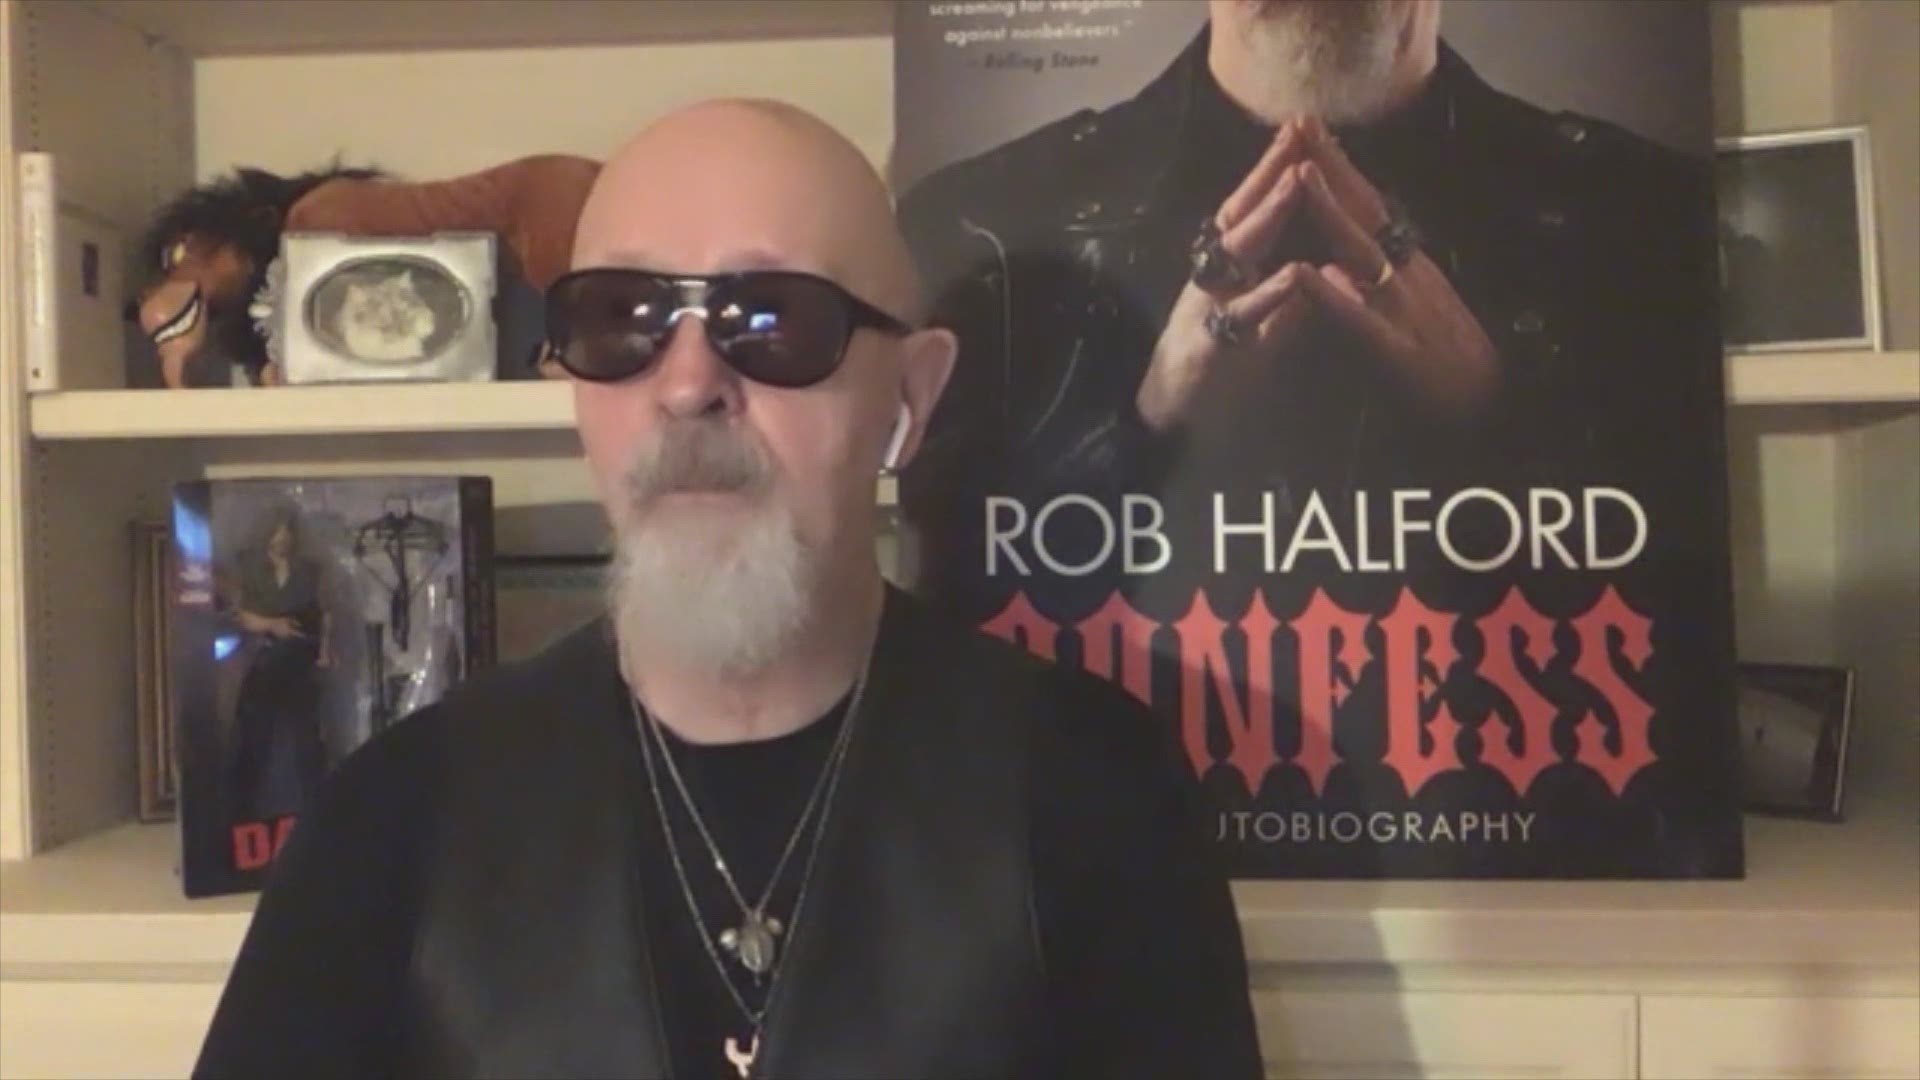 Lou talks with Rob Halford and learns about his new autobiography "Confess"